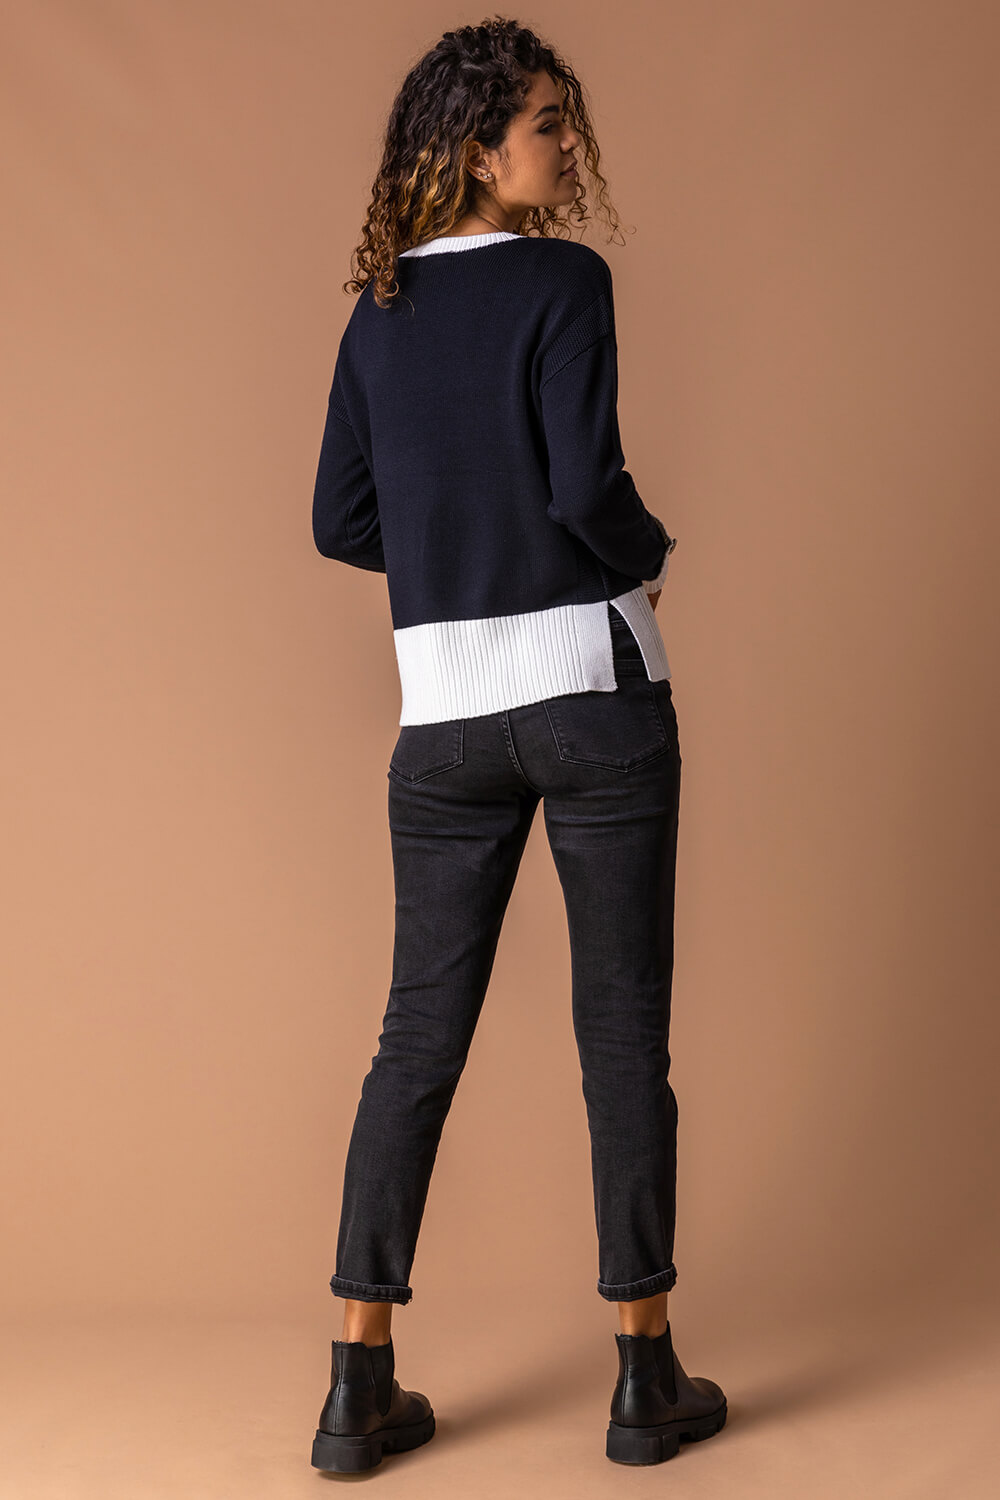 Midnight Blue Contrast Colour Block Jumper, Image 3 of 4